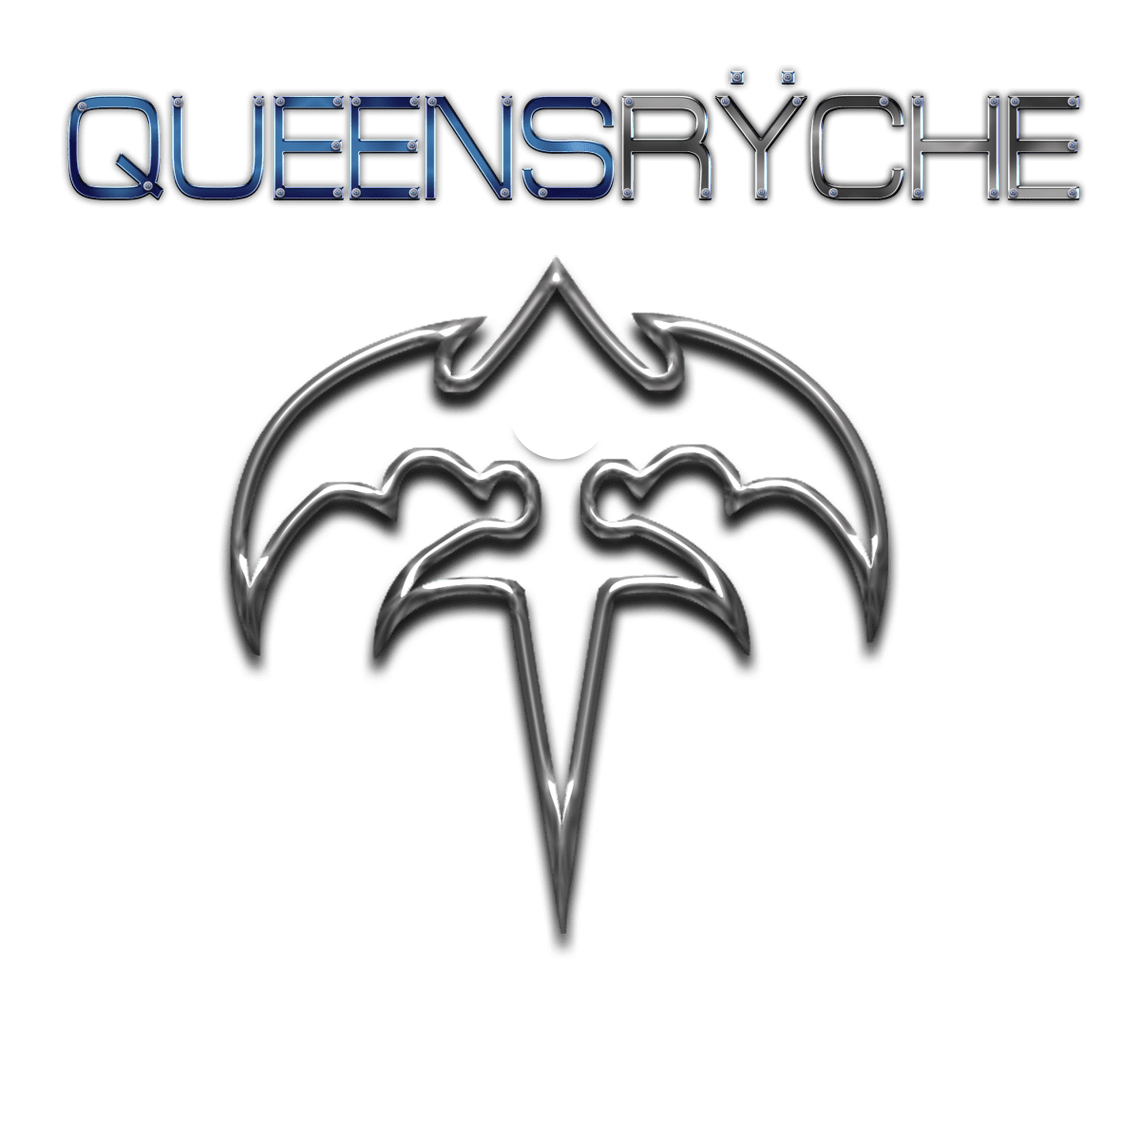 Queensryche Logo - Queensryche - The Metal Channel